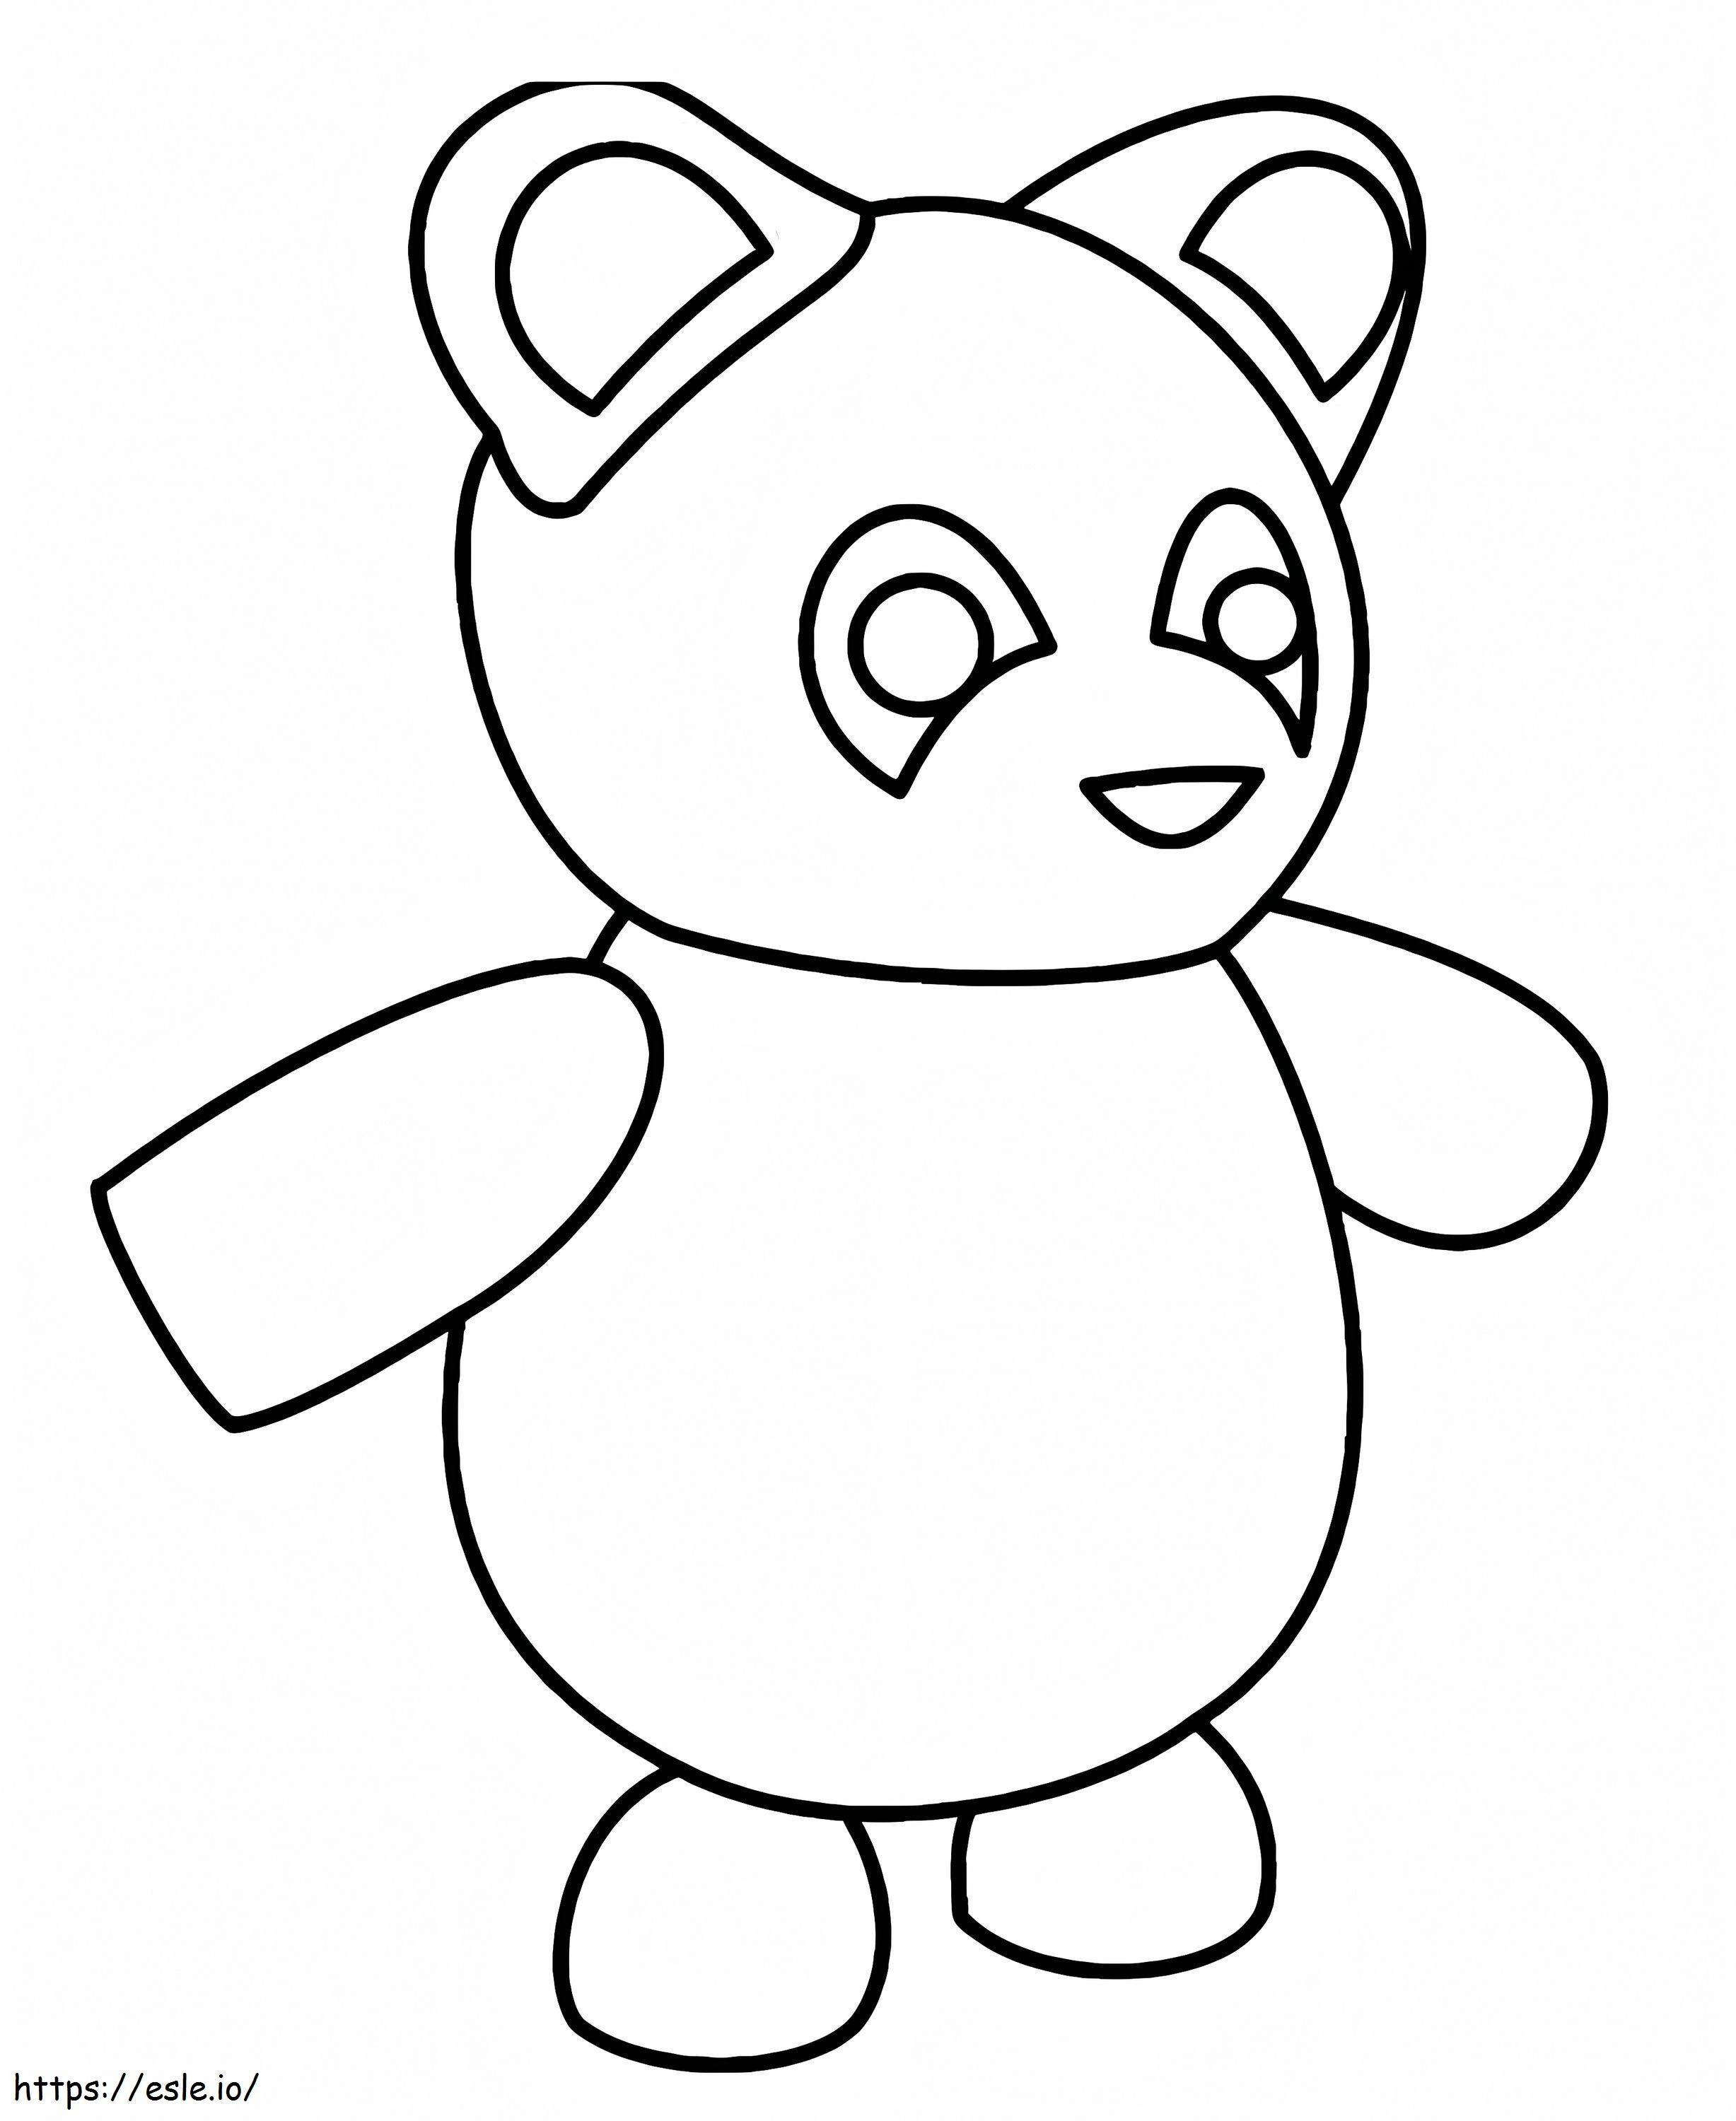 Teddy Bear Adopt Me coloring page